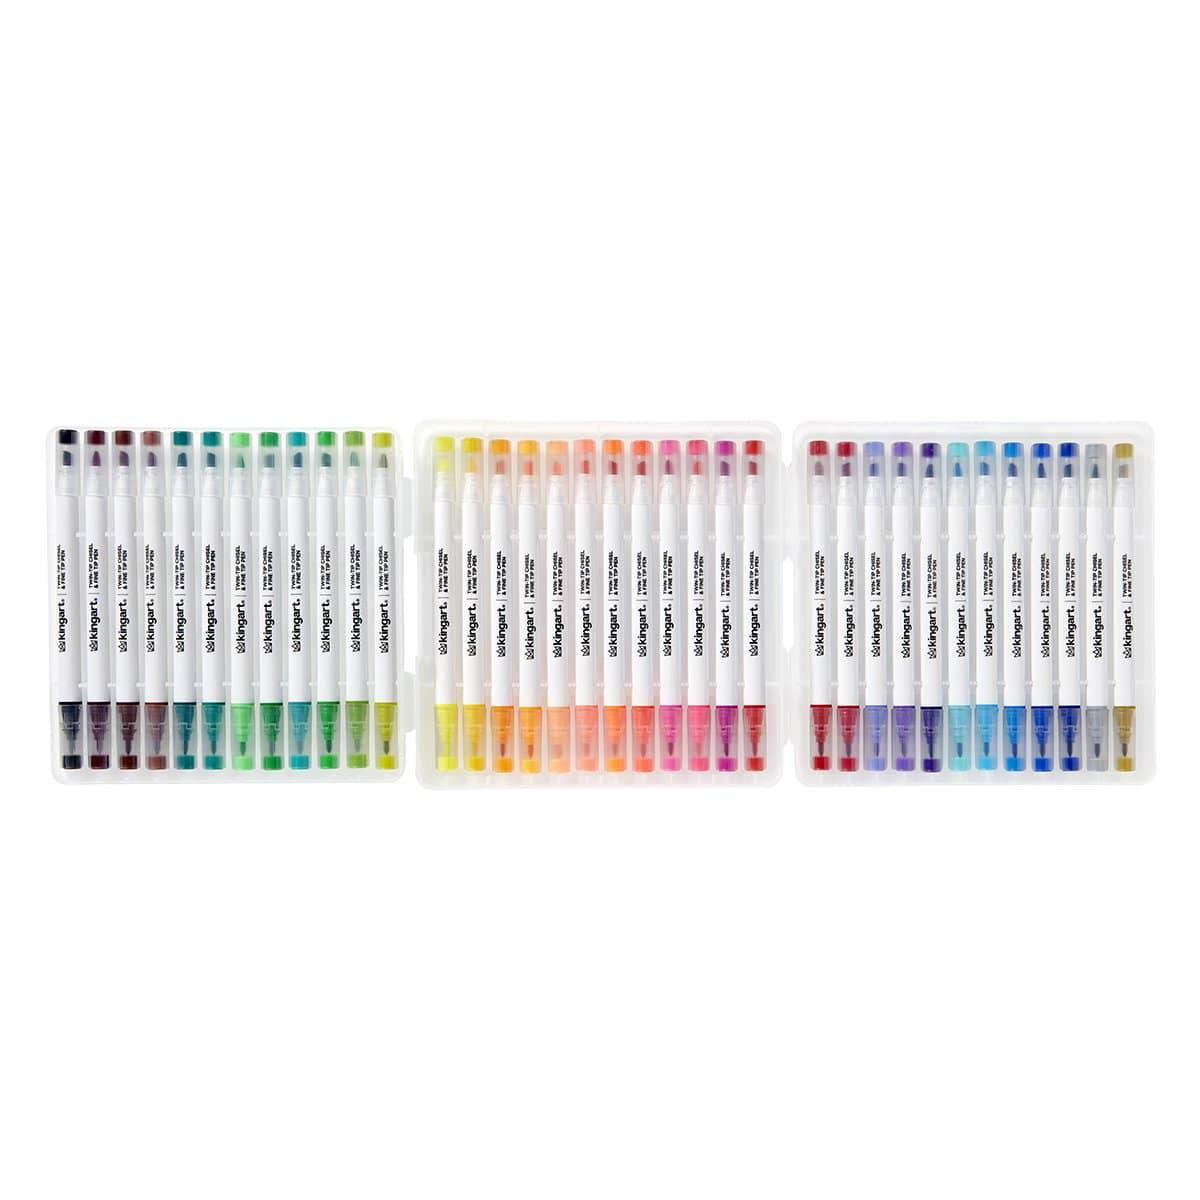 KINGART® Twin-Tip™ Brush & Ultra Fine Markers, Carrying Case, Set of 12  Unique Colors